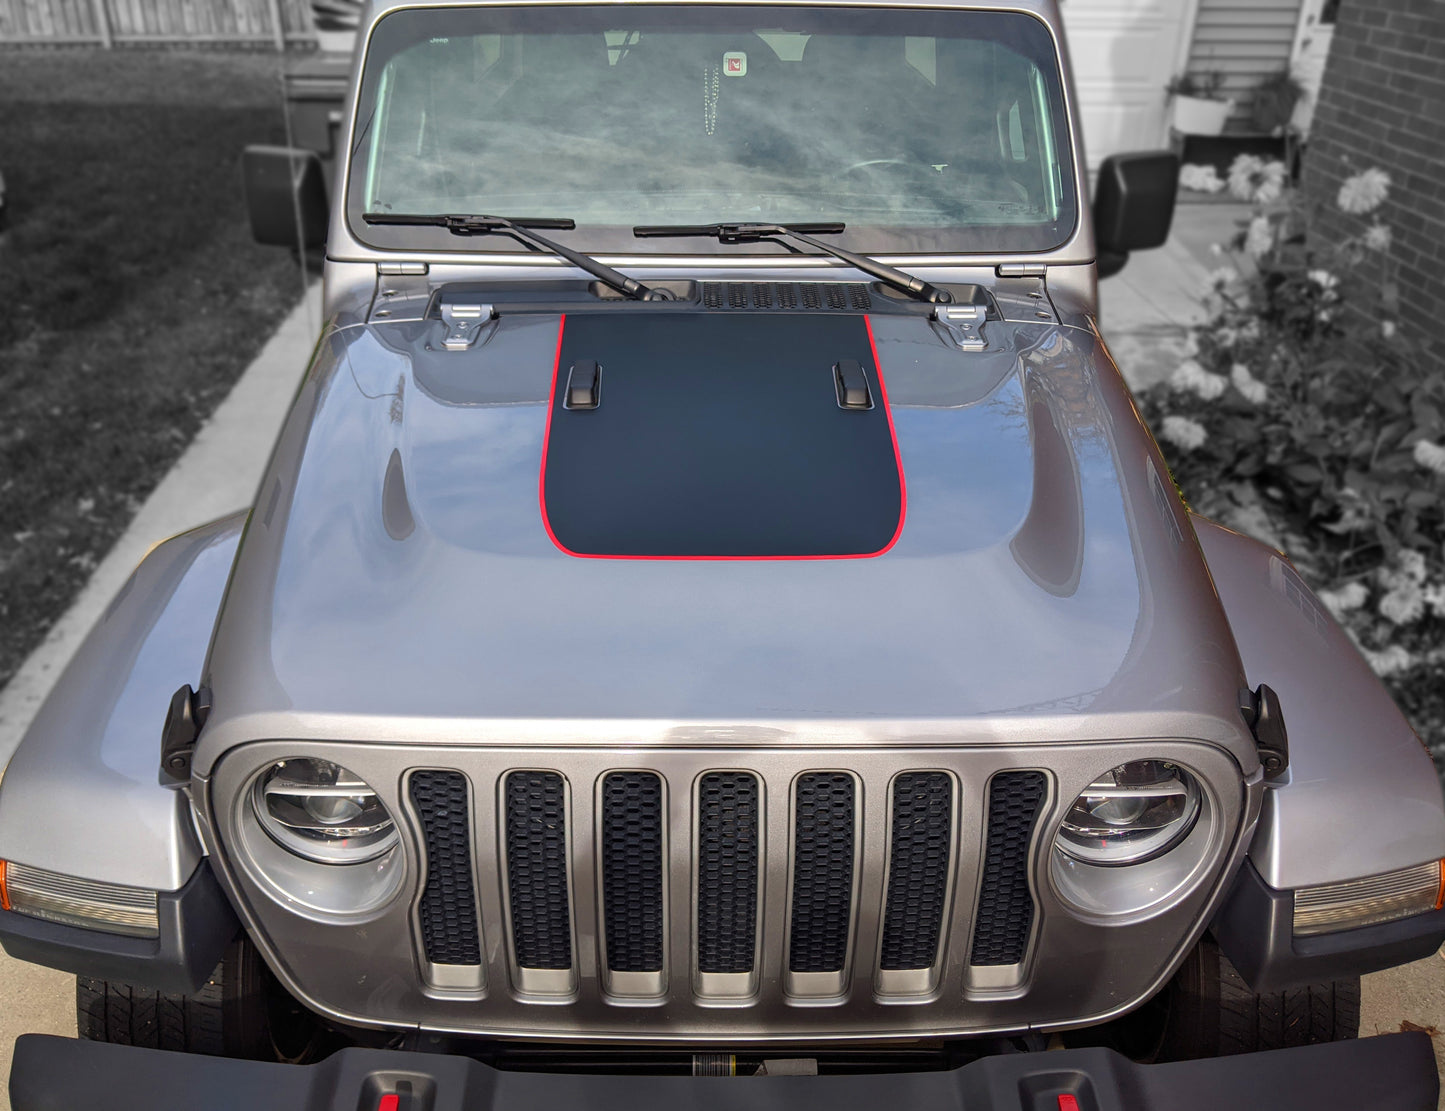 Large Red Line Rubicon Blackout Hood Decal- Fits Jeep Wrangler & Gladiator JL Hood Decal 2-Layer Decal